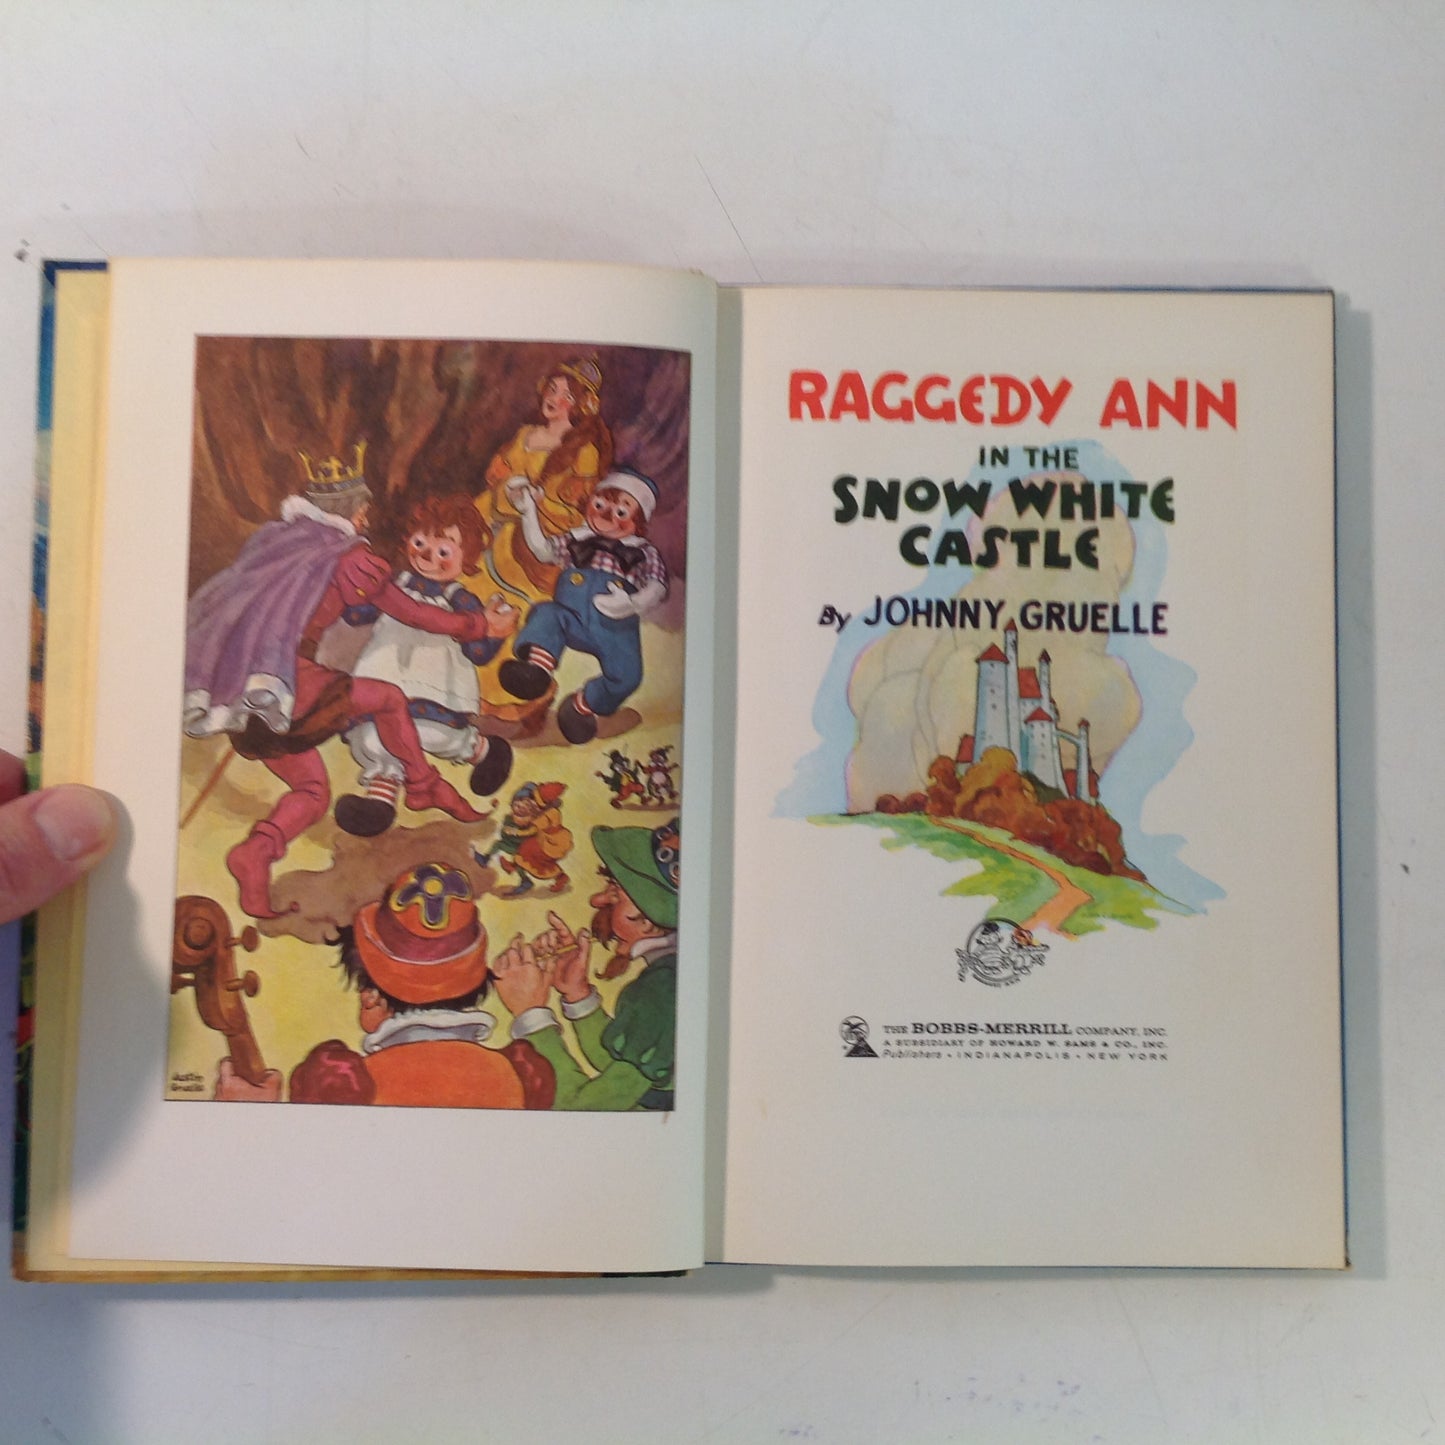 Vintage 1960 Bobbs-Merrill Hardcover Book Raggedy Ann in the Snow White Castle by Johnny Gruelle